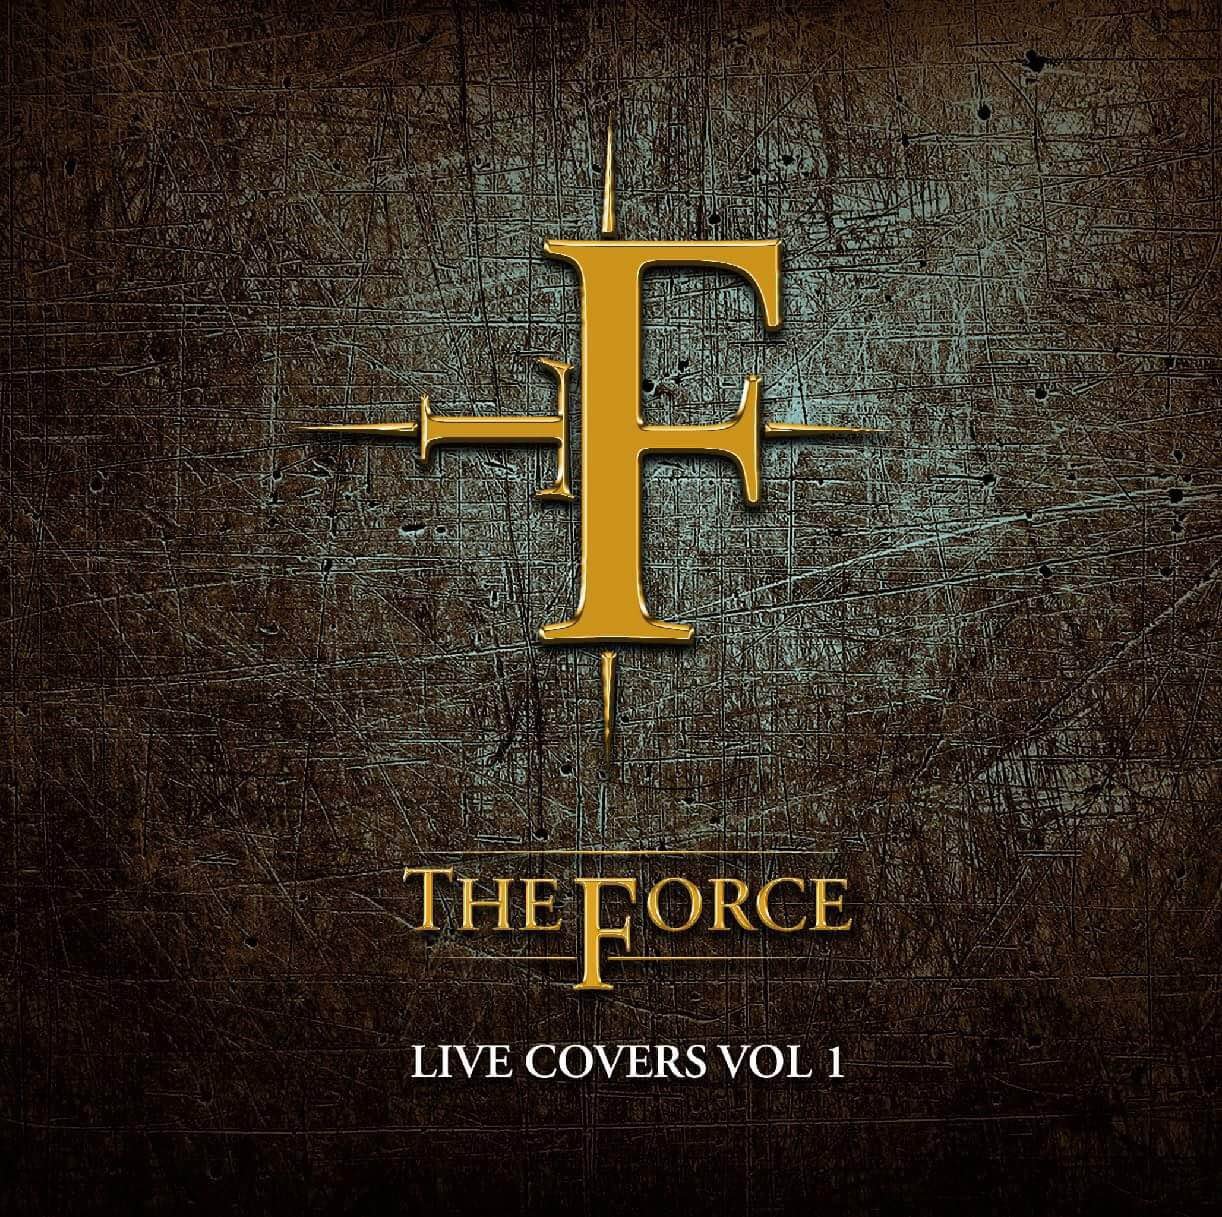 Live Covers Vol 1